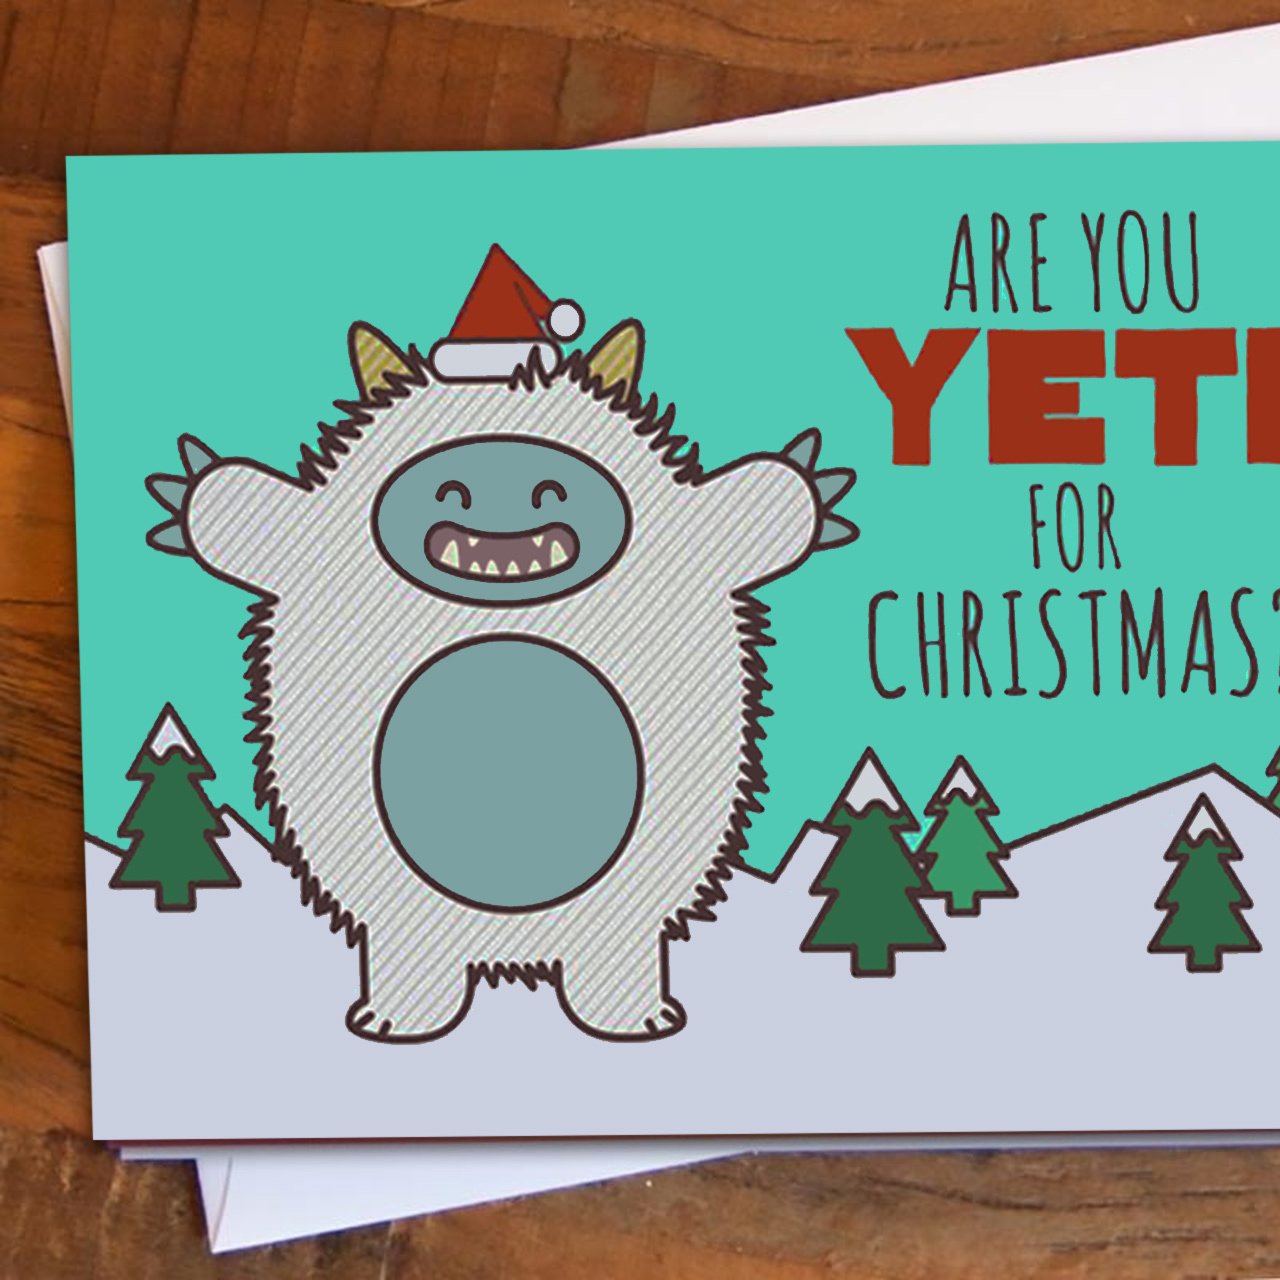 Yeti Christmas Card, Get Yeti for a Warmhearted Christmas